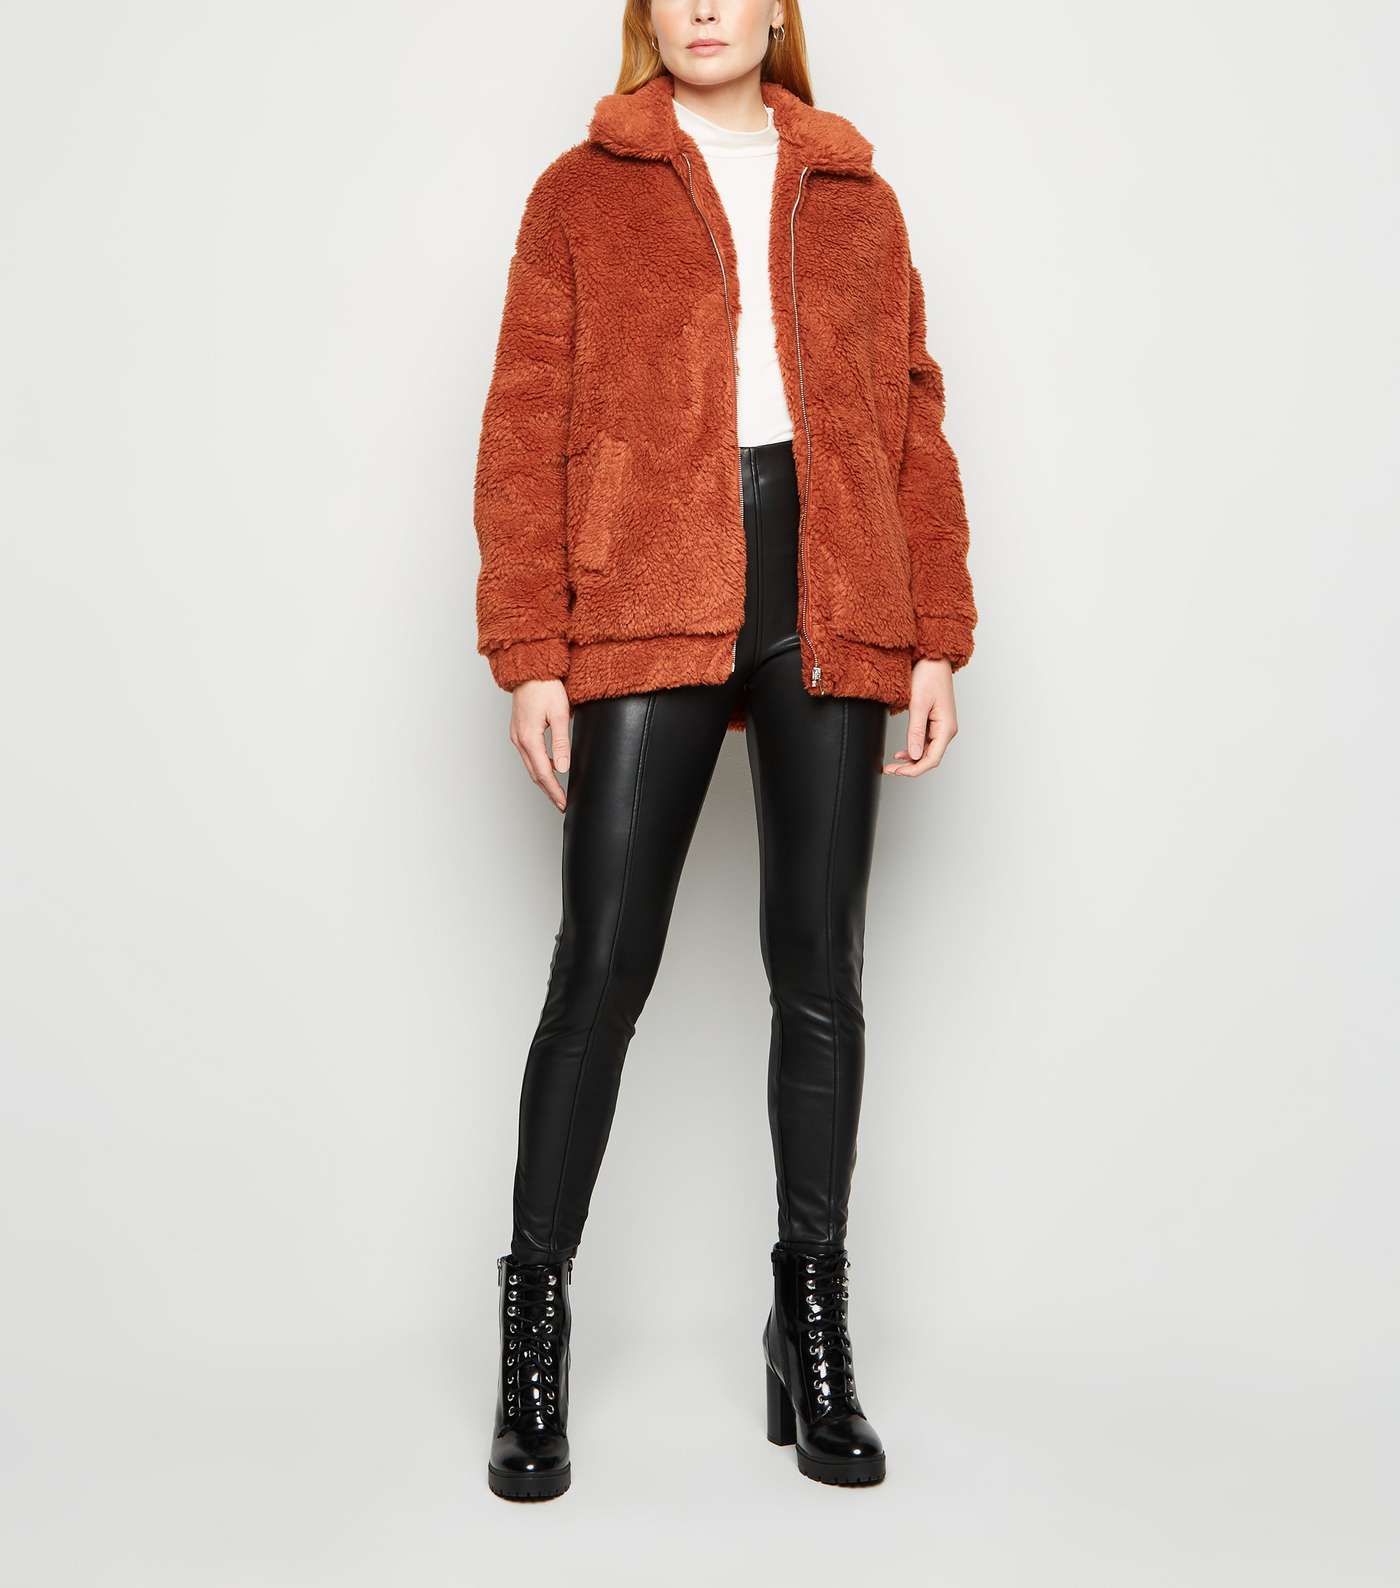 Cameo Rose Rust Teddy Bomber Jacket Image 2